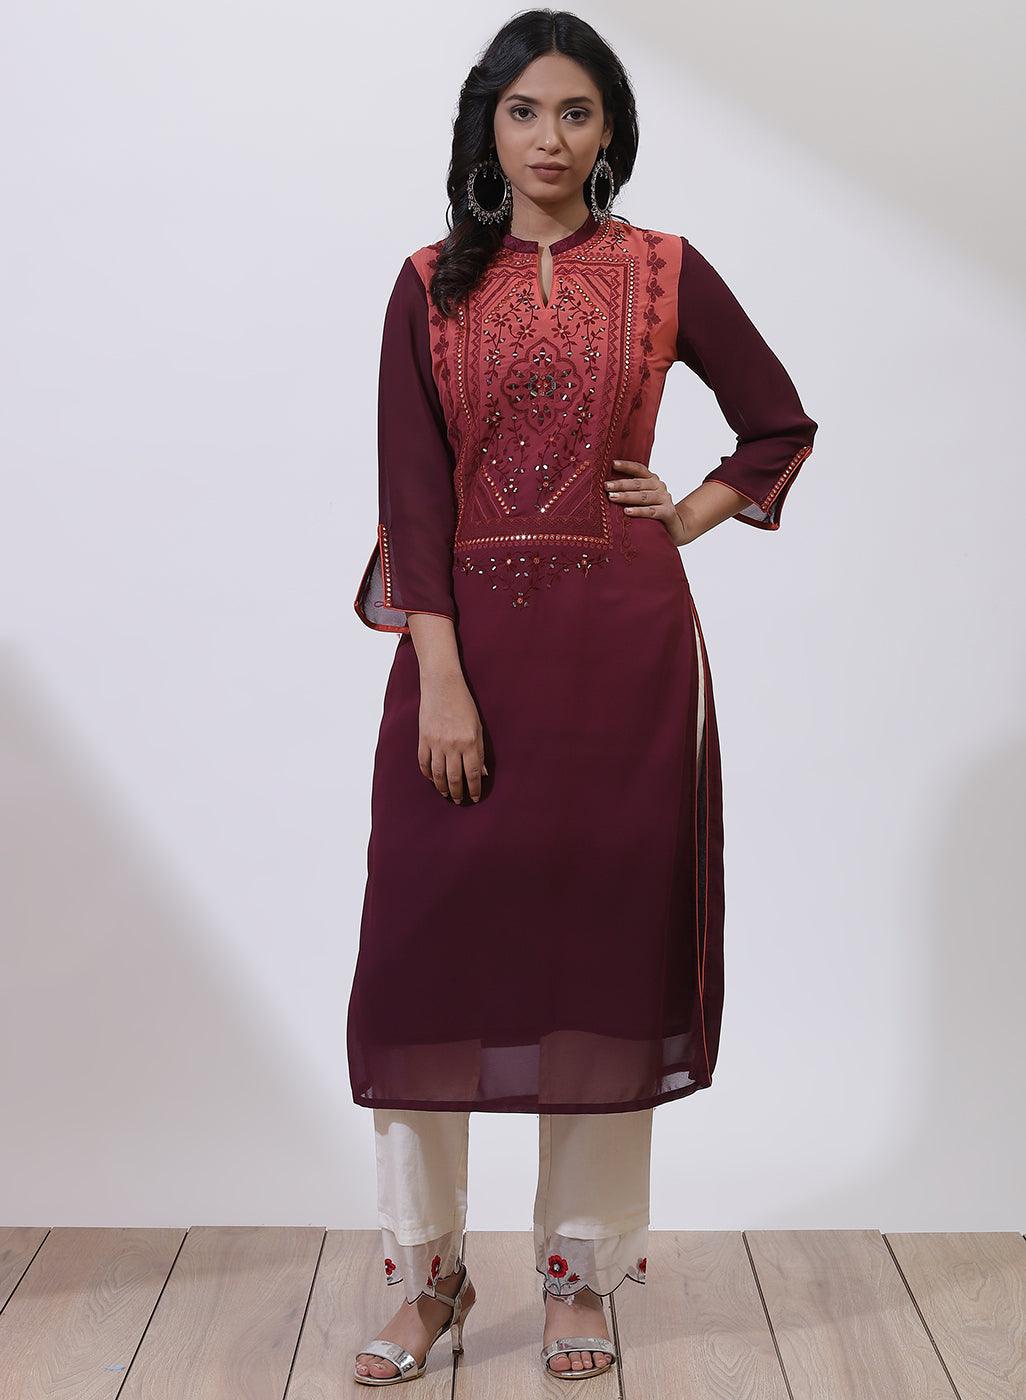 Now Flat 50% Off on all Summer Kurtis..Last few days left for Sale..Hurry  for your Sizes. VISIT LAKSHITA PATHANKOT | By Lakshita PathankotFacebook